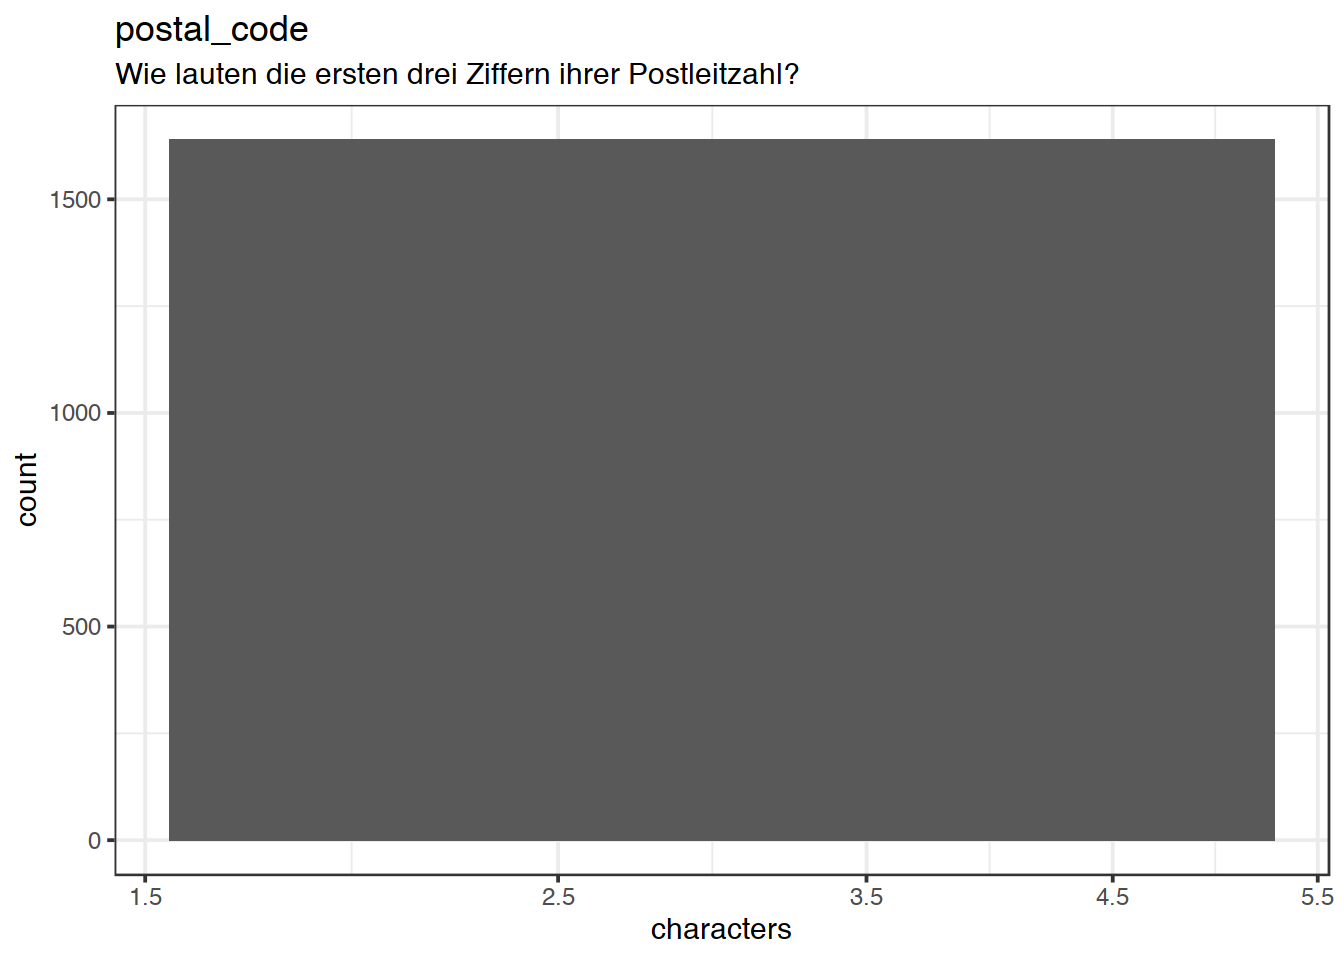 Distribution of values for postal_code